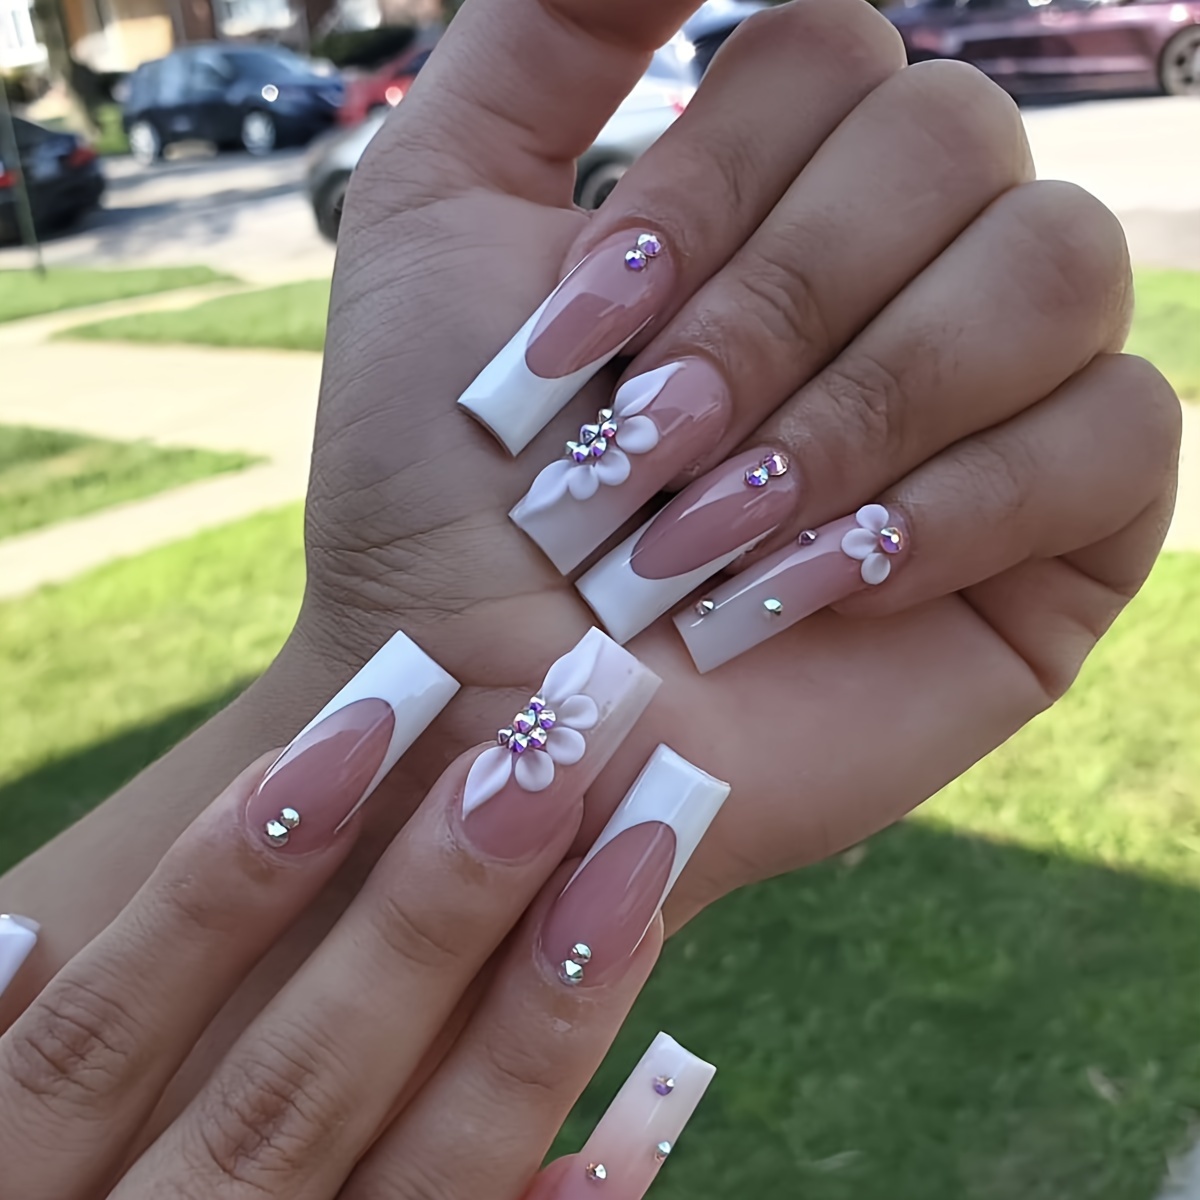 

24pcs/set Long Coffin Nails 3d Stereoscopic Relief Petals With Rhinestone Design Glued To Nails Gloss Fully Covered Fake Nails For Women And Girls